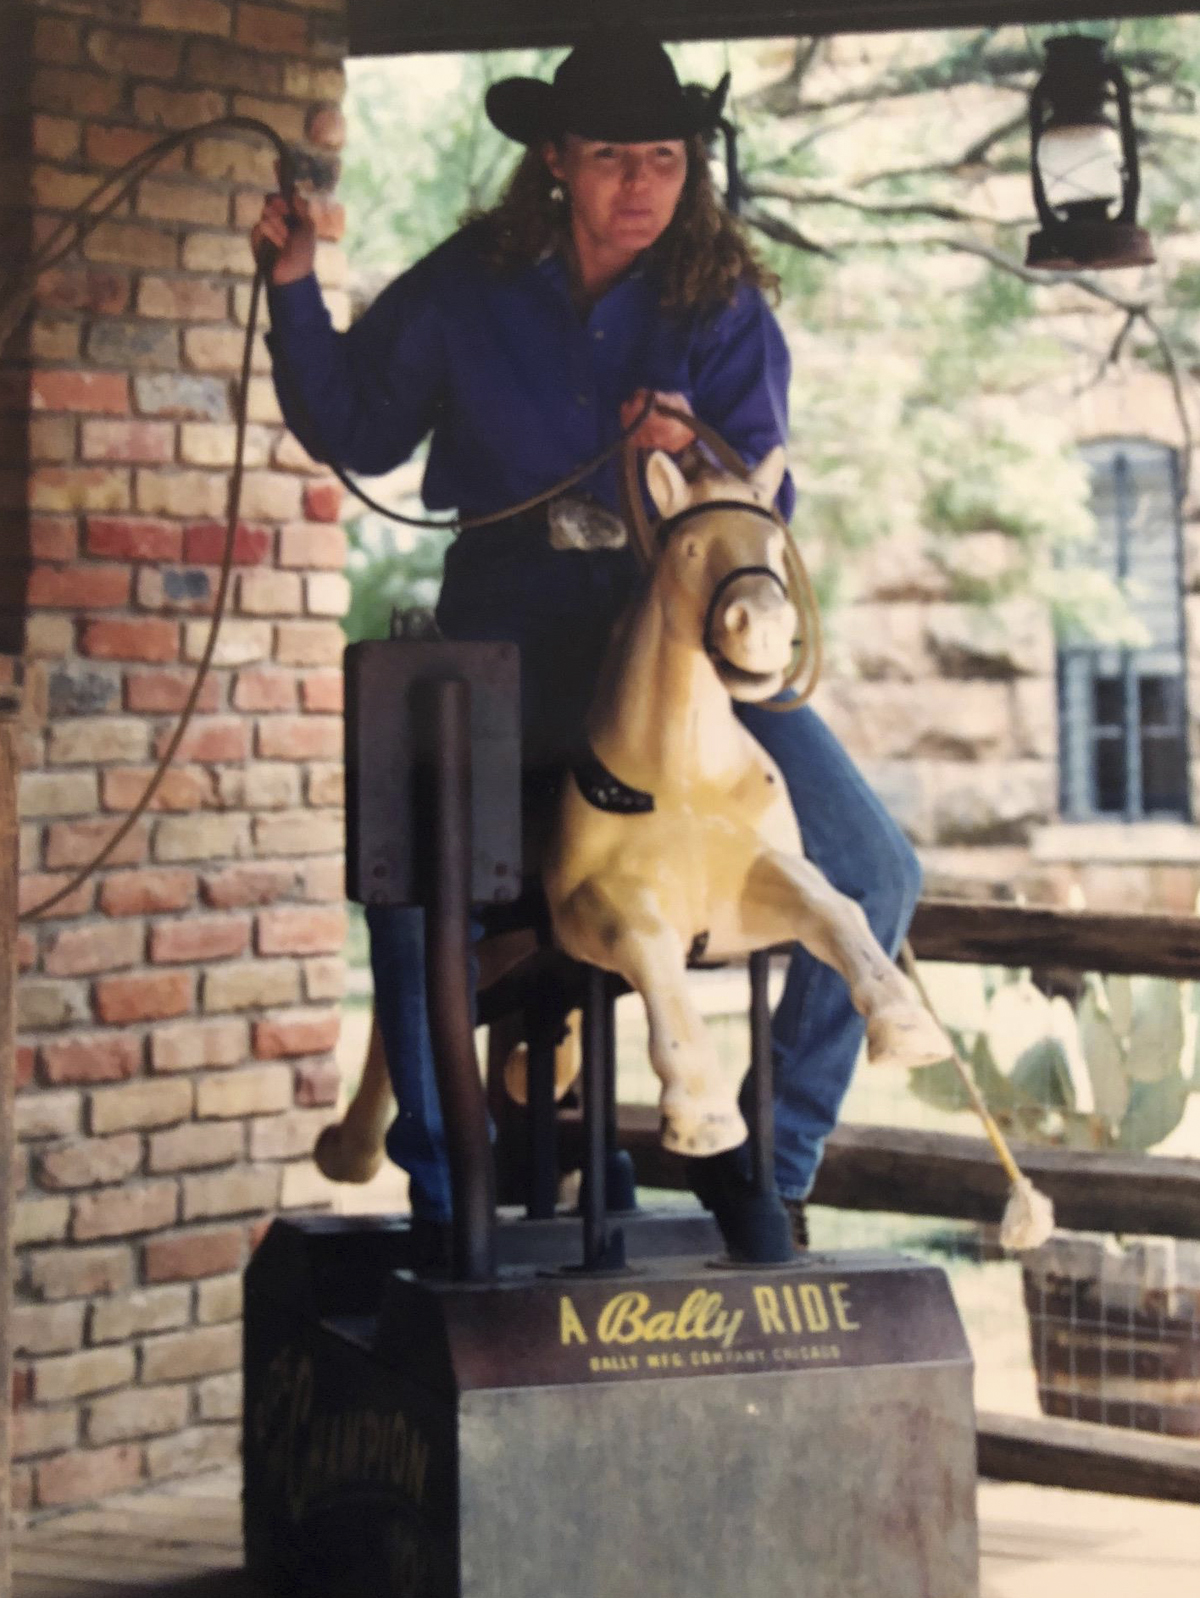 roping on coin operated horse